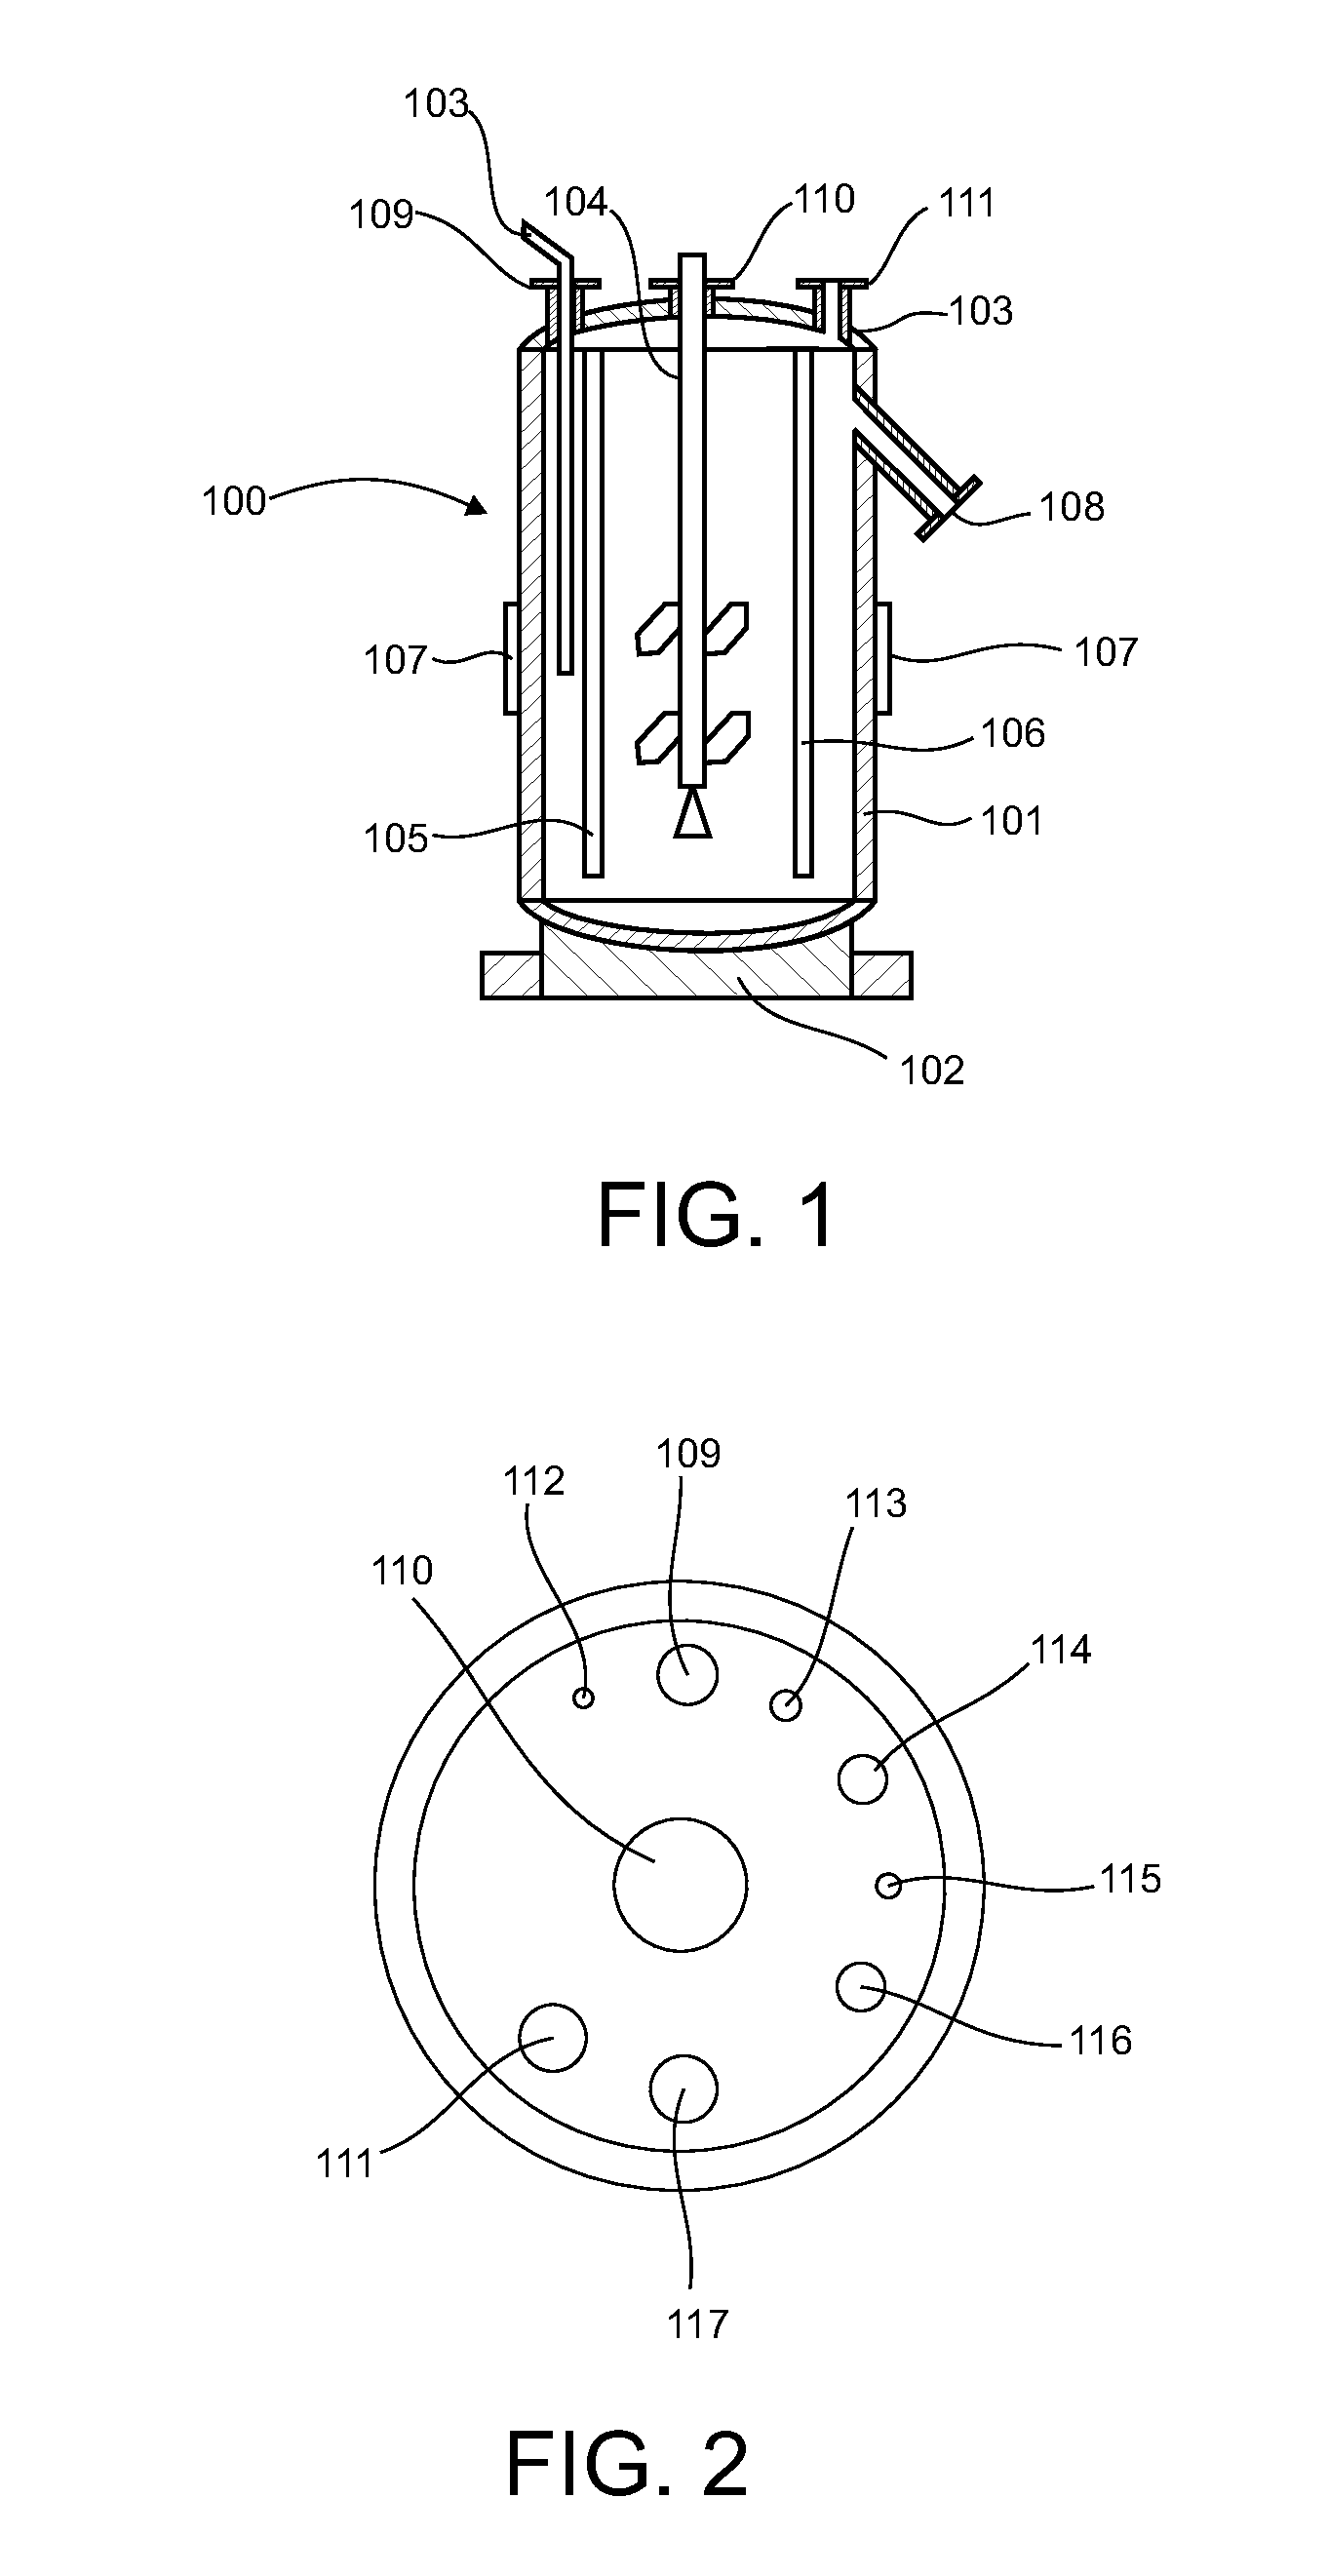 Bioleaching bioreactor with a system for injection and diffusion of air